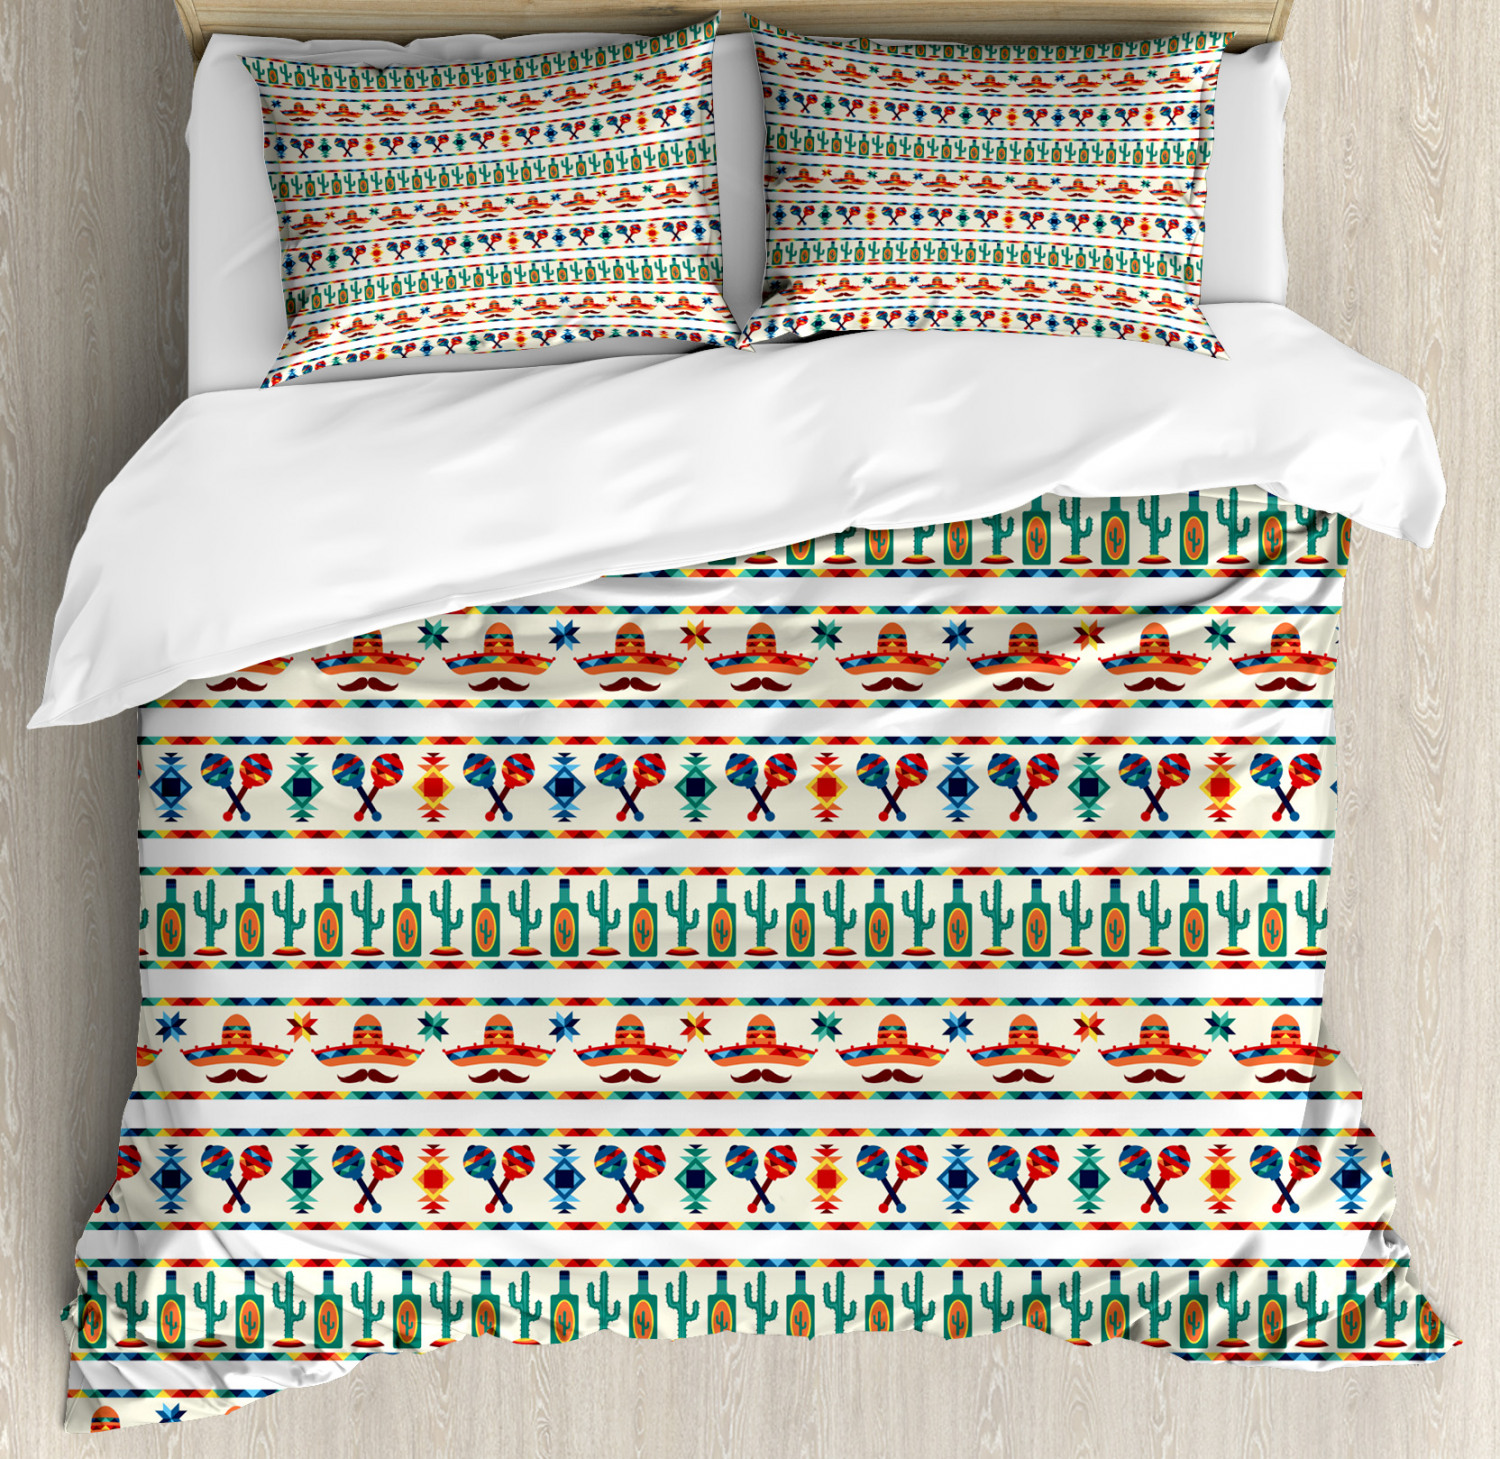 Mexican Duvet Cover Set With Pillow Shams Native Cultural Borders